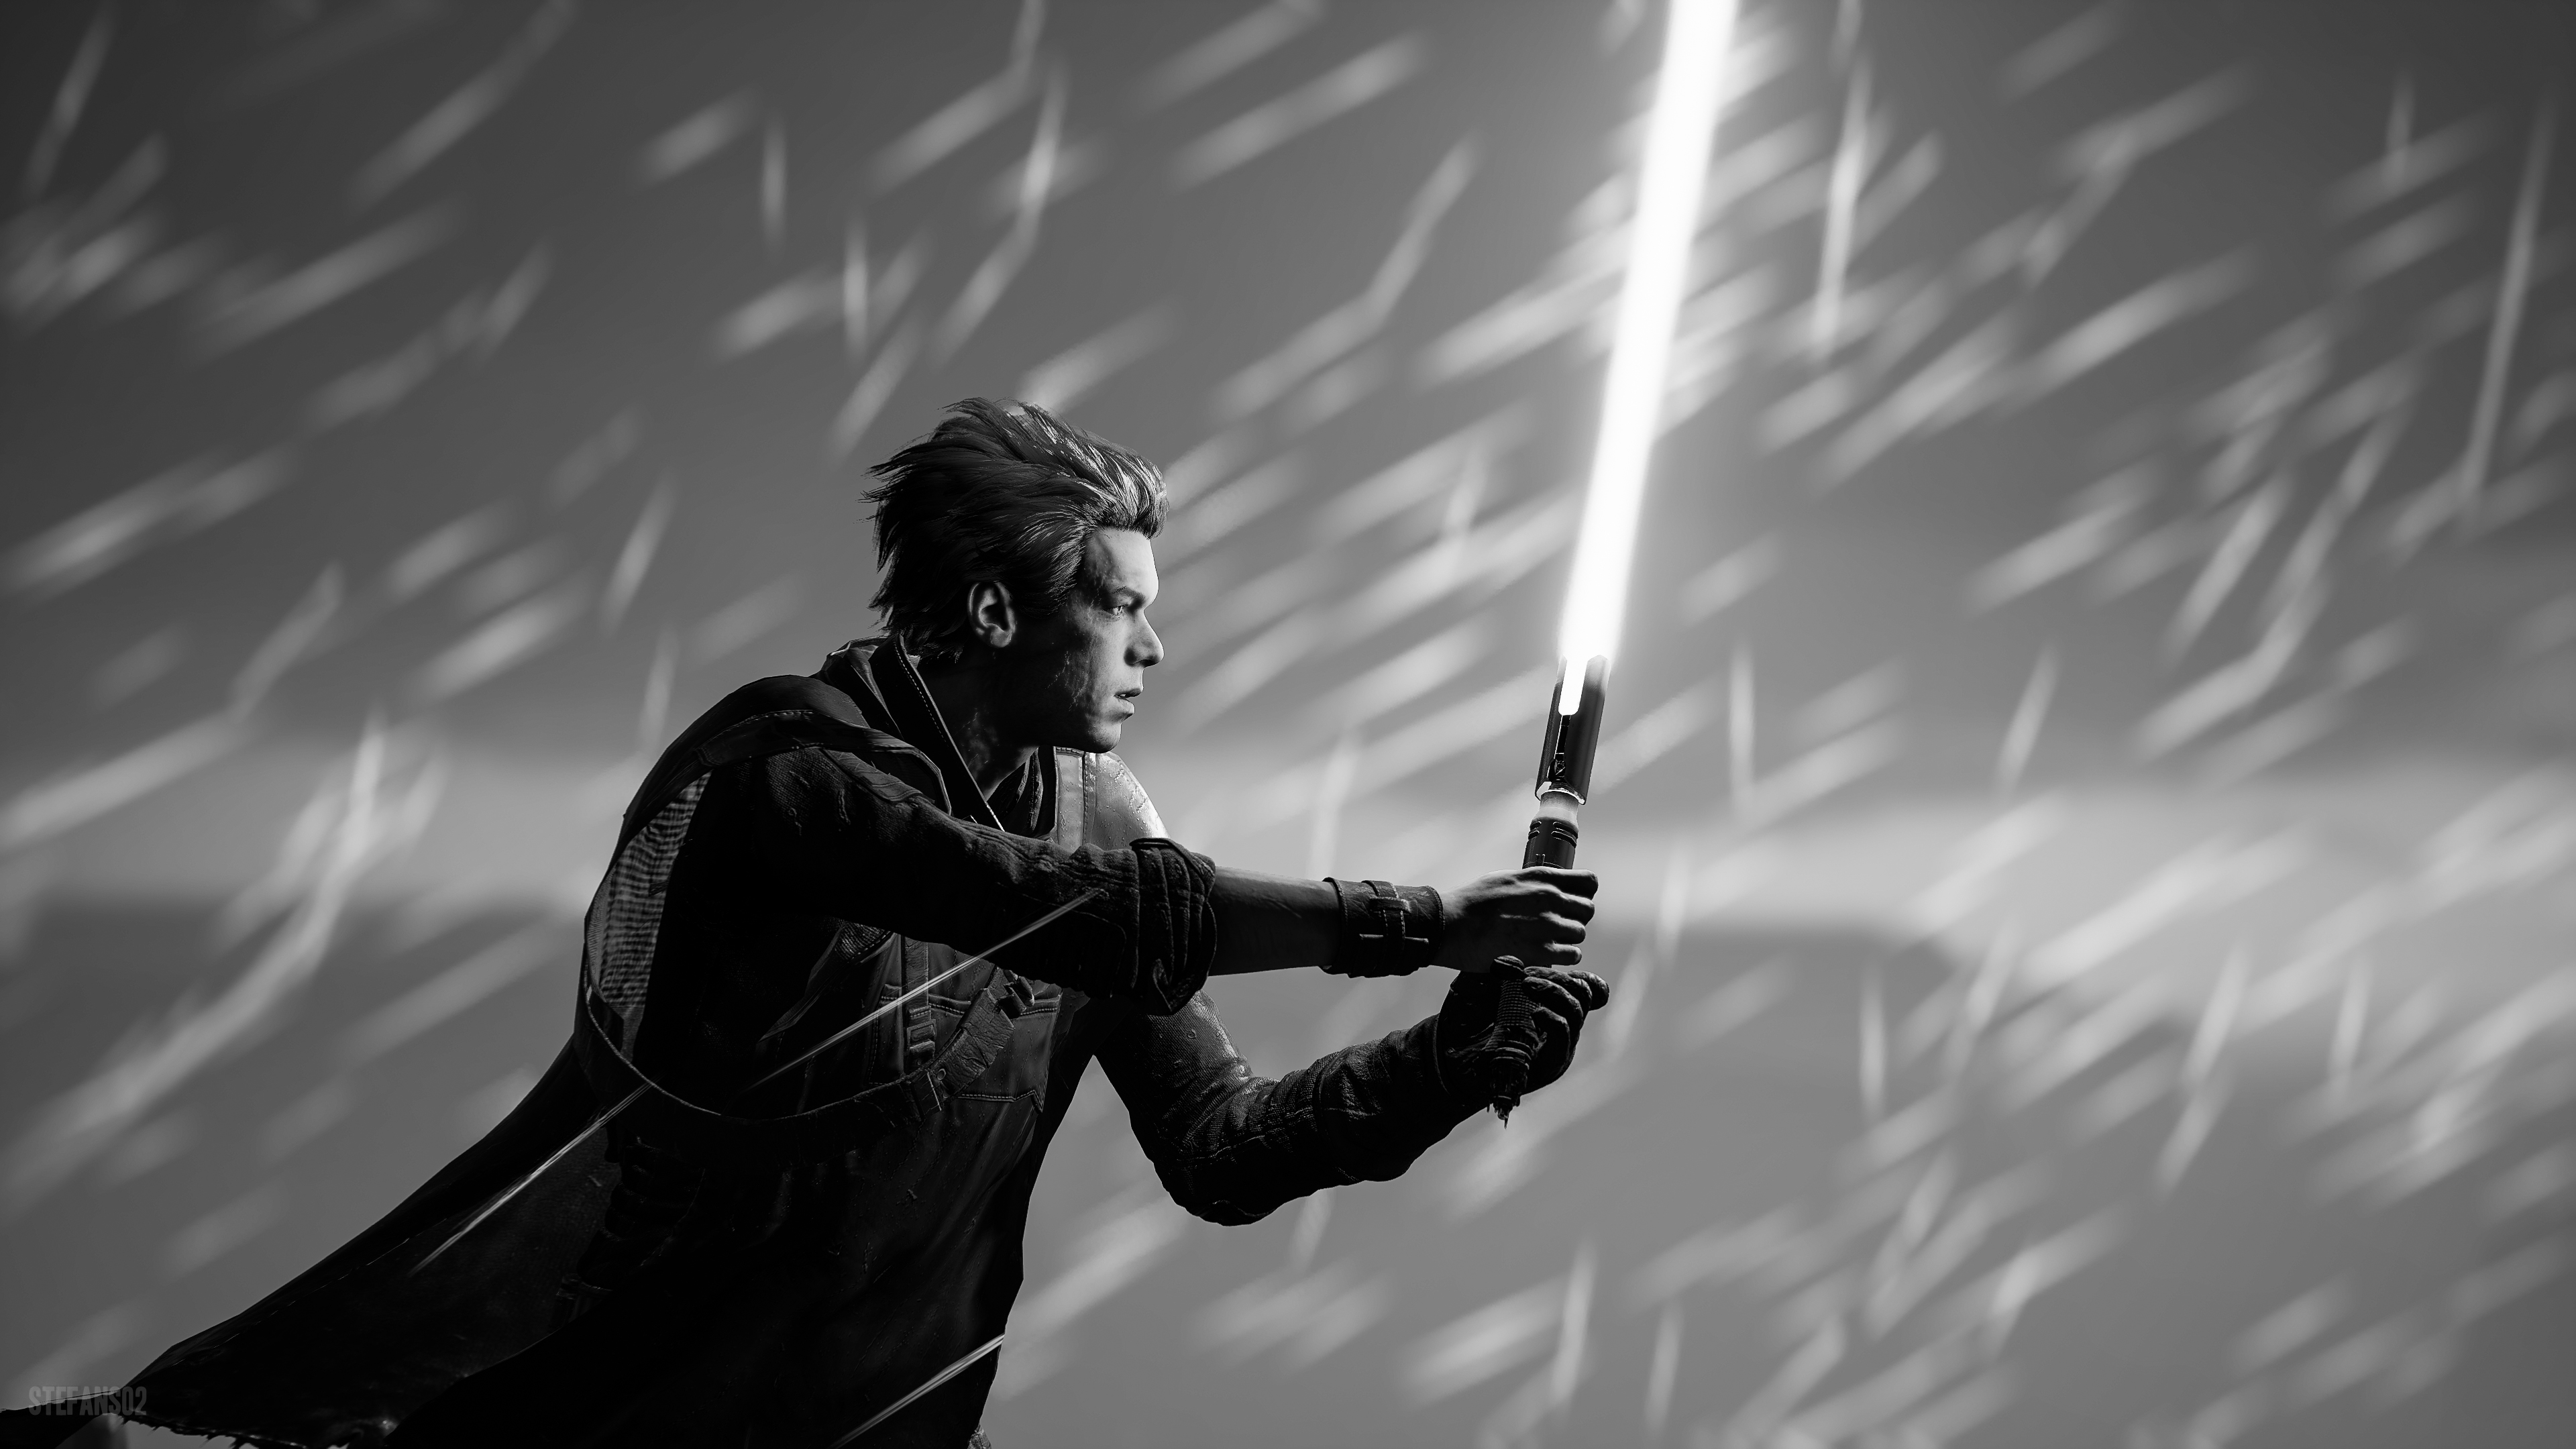 star-wars-jedi-fallen-order-come-and-get-it-by-stefans02